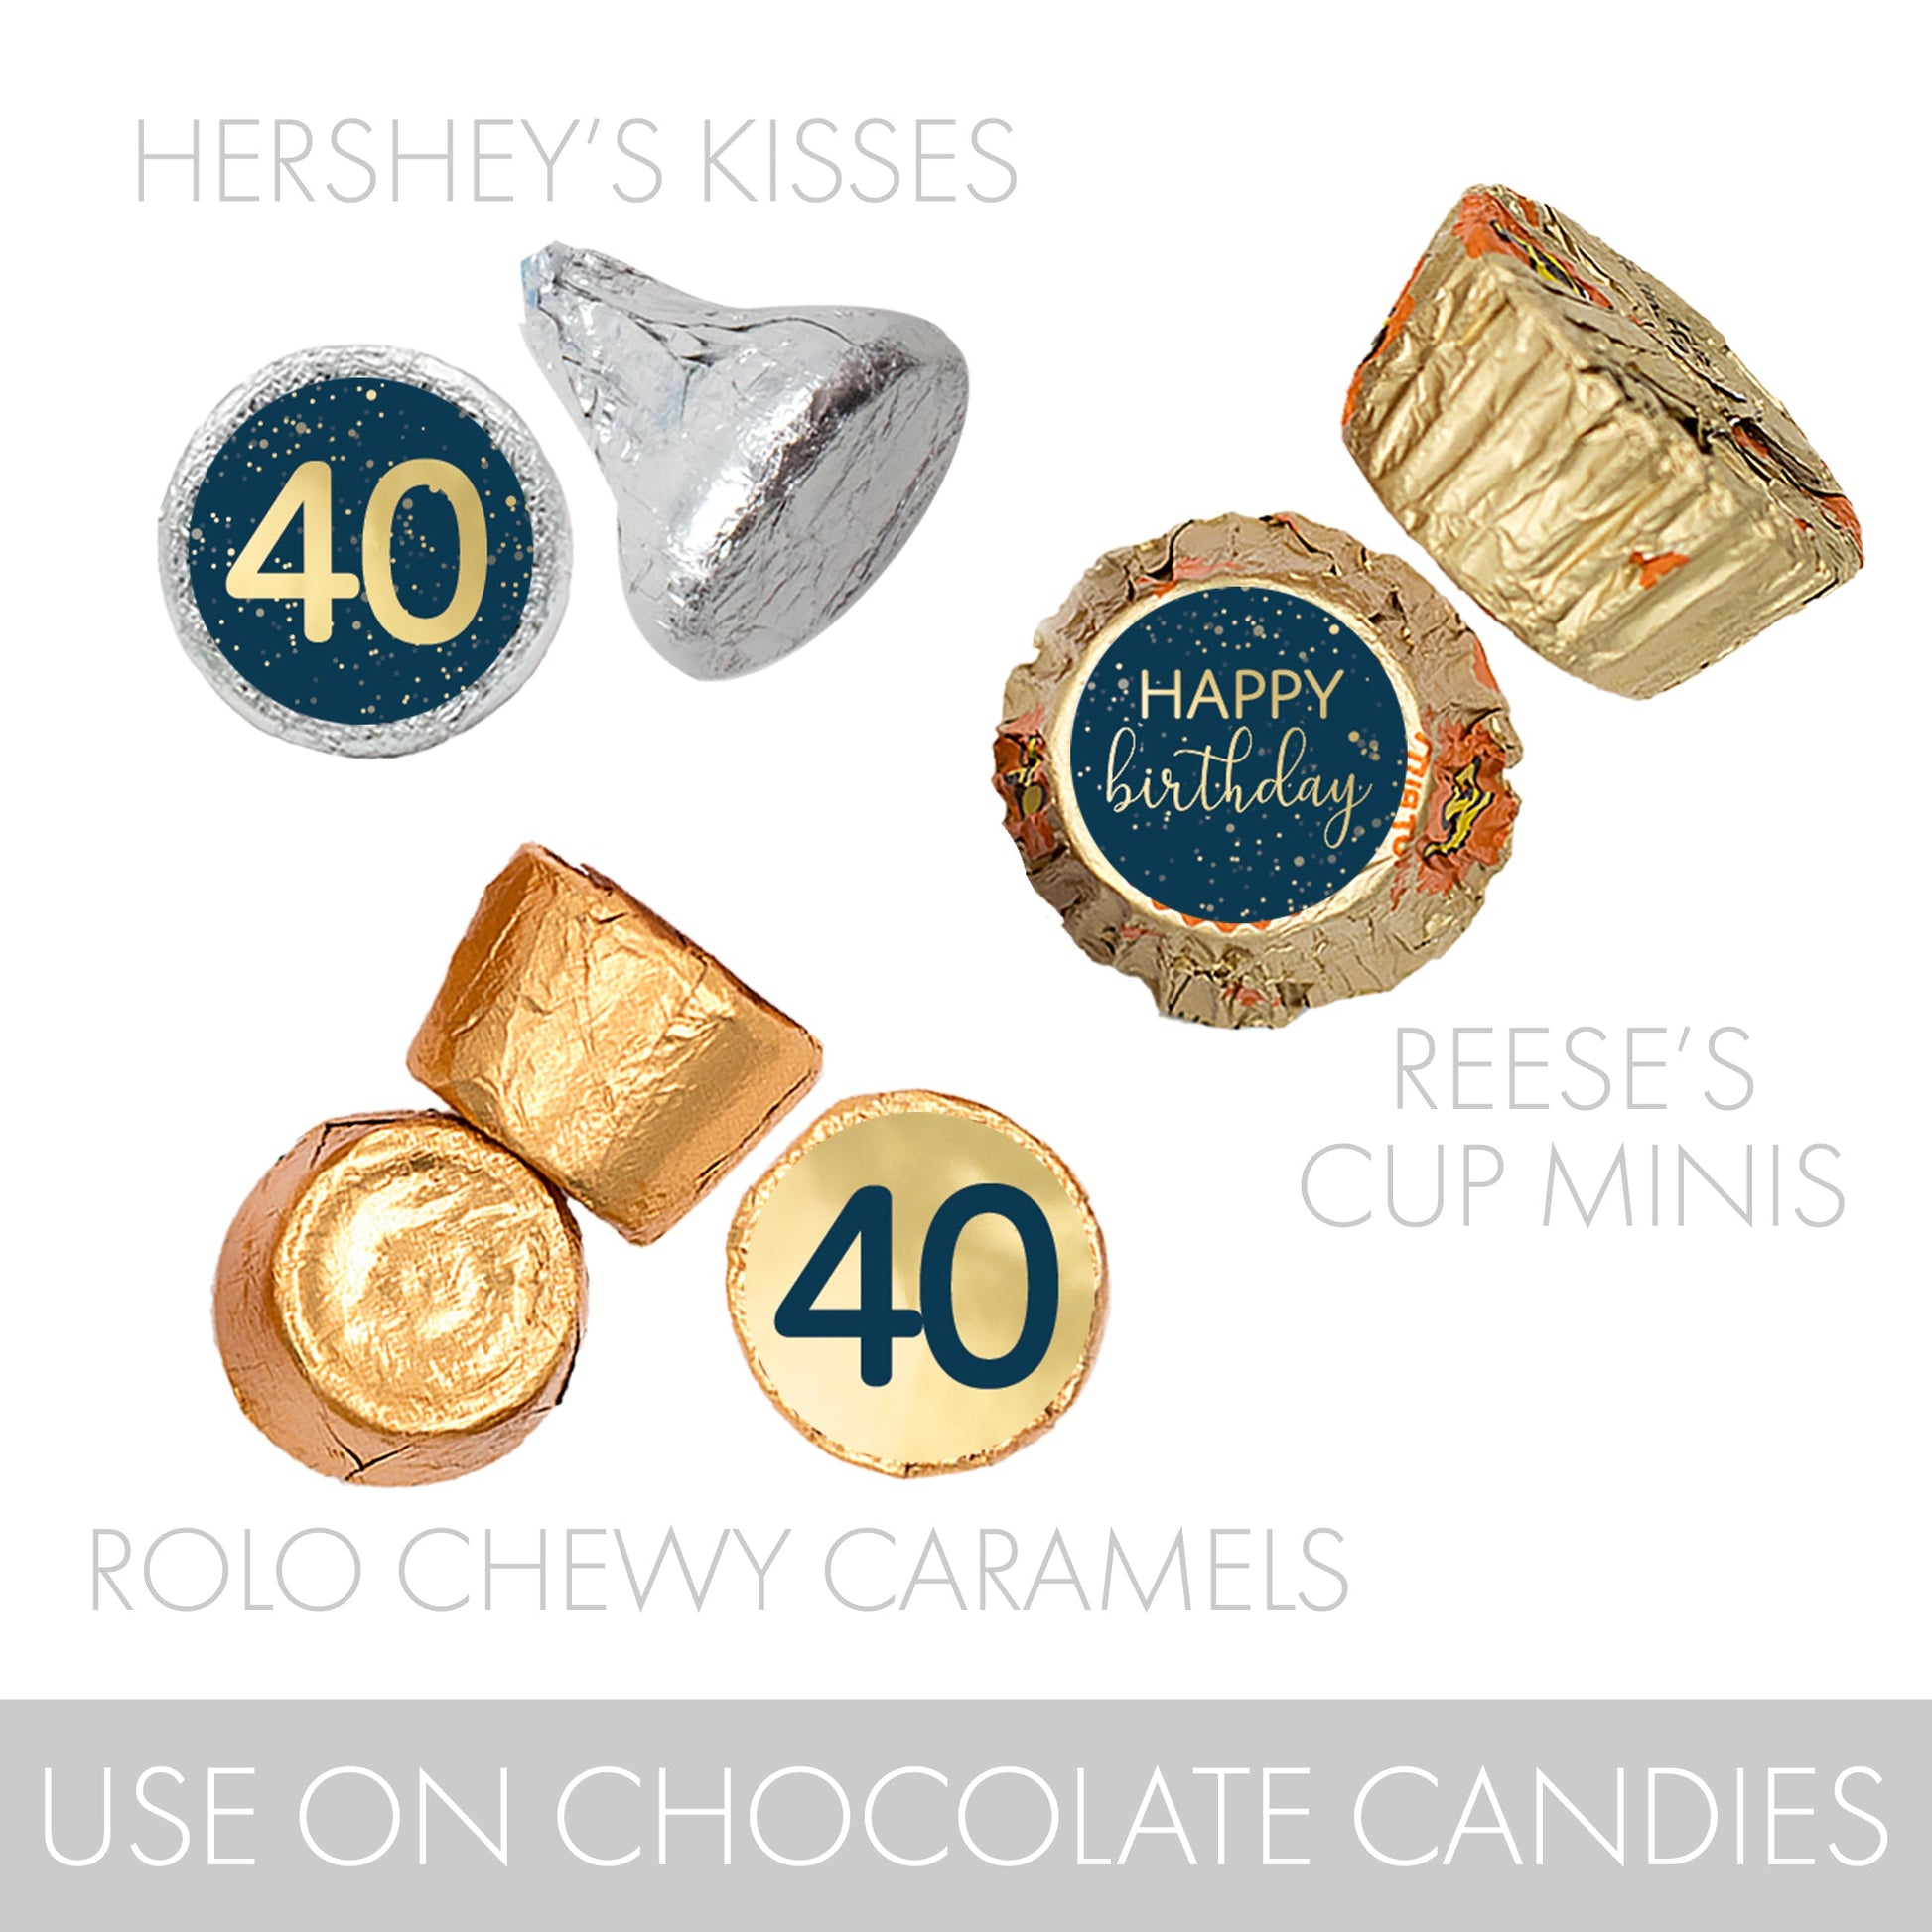 Celebrate your 40th birthday in style with these matching Hersheys Kisses stickers